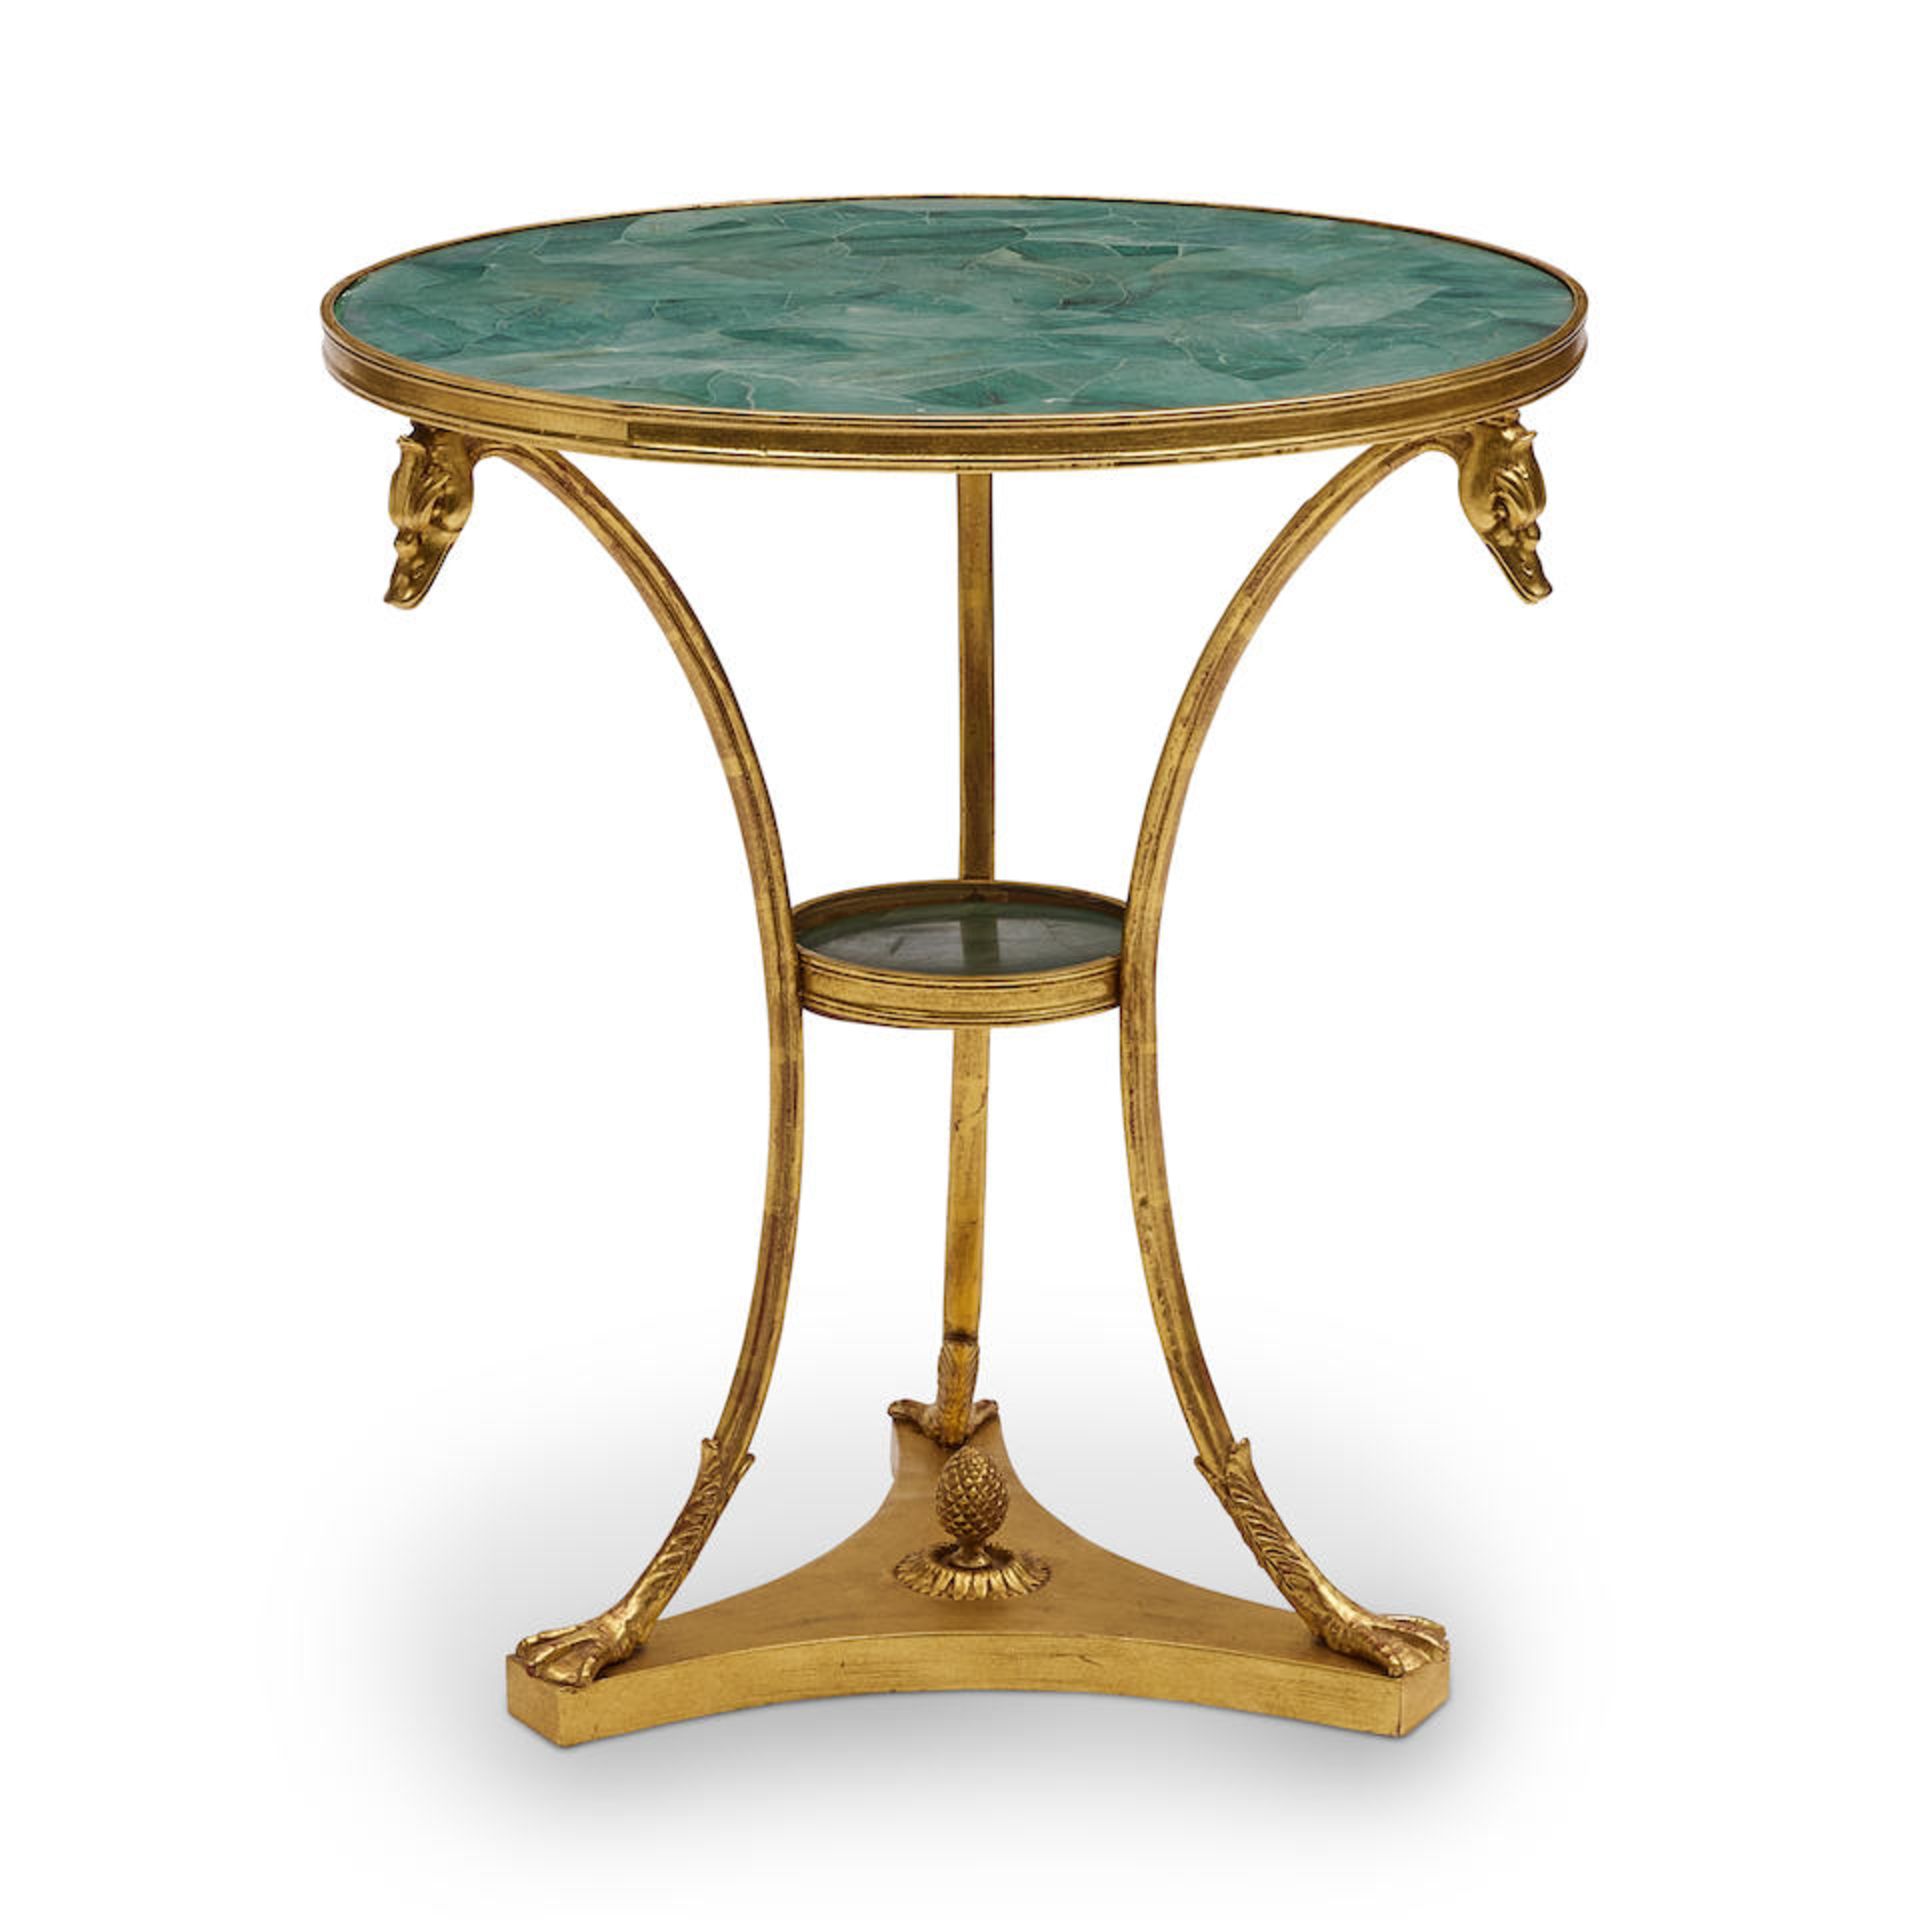 A NEOCLASSICAL STYLE GREEN STONE AND GILT BRONZE GUERIDON